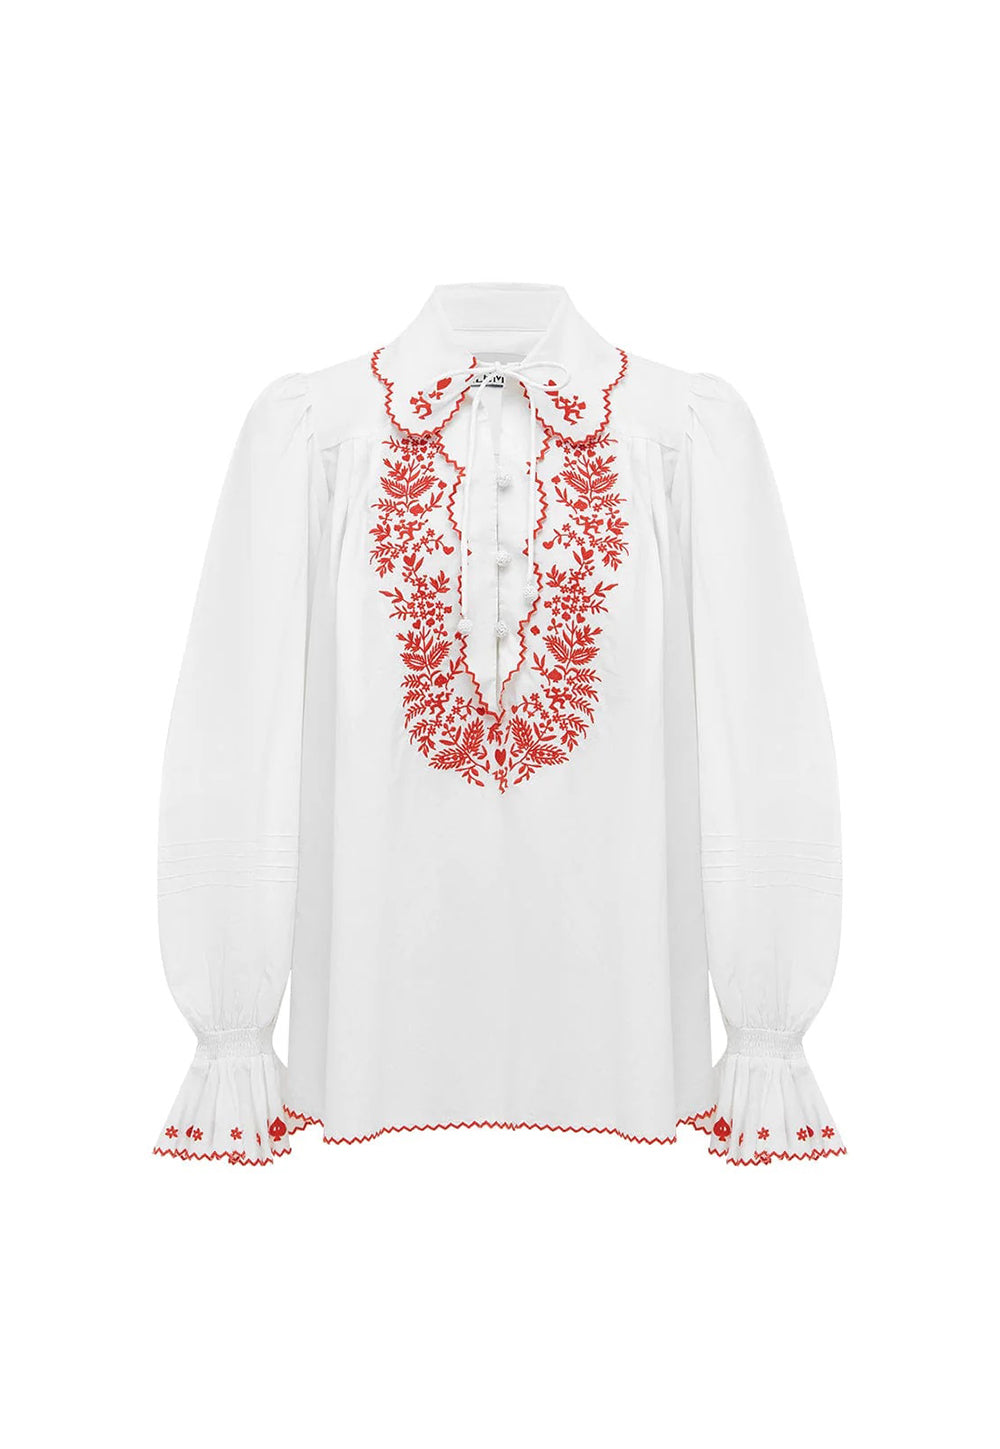 Hearts Embroidered Shirt - Ivory sold by Angel Divine